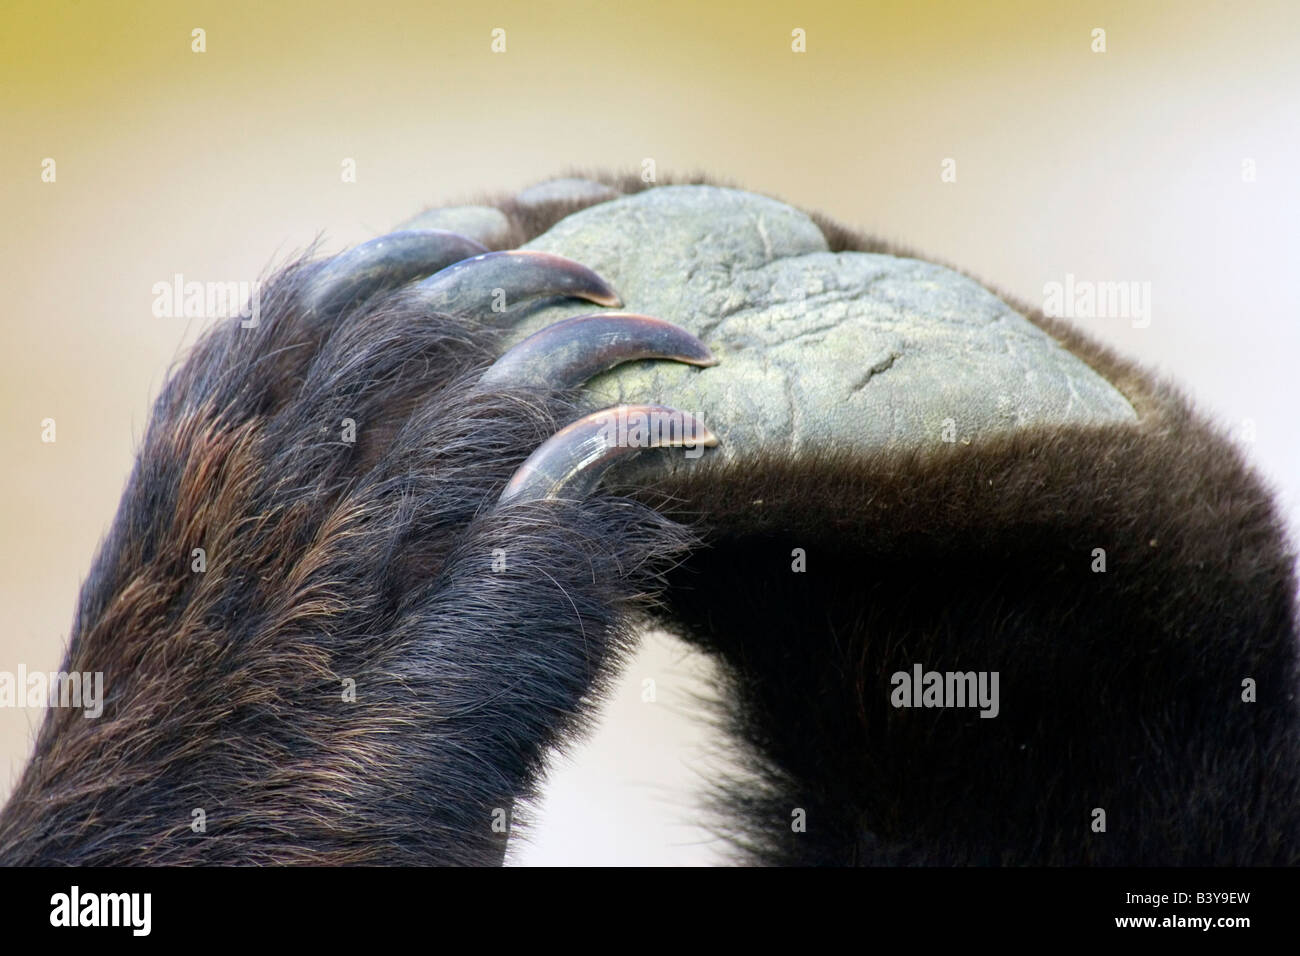 An intimate portrait of a grizzly's paws and claws. Stock Photo